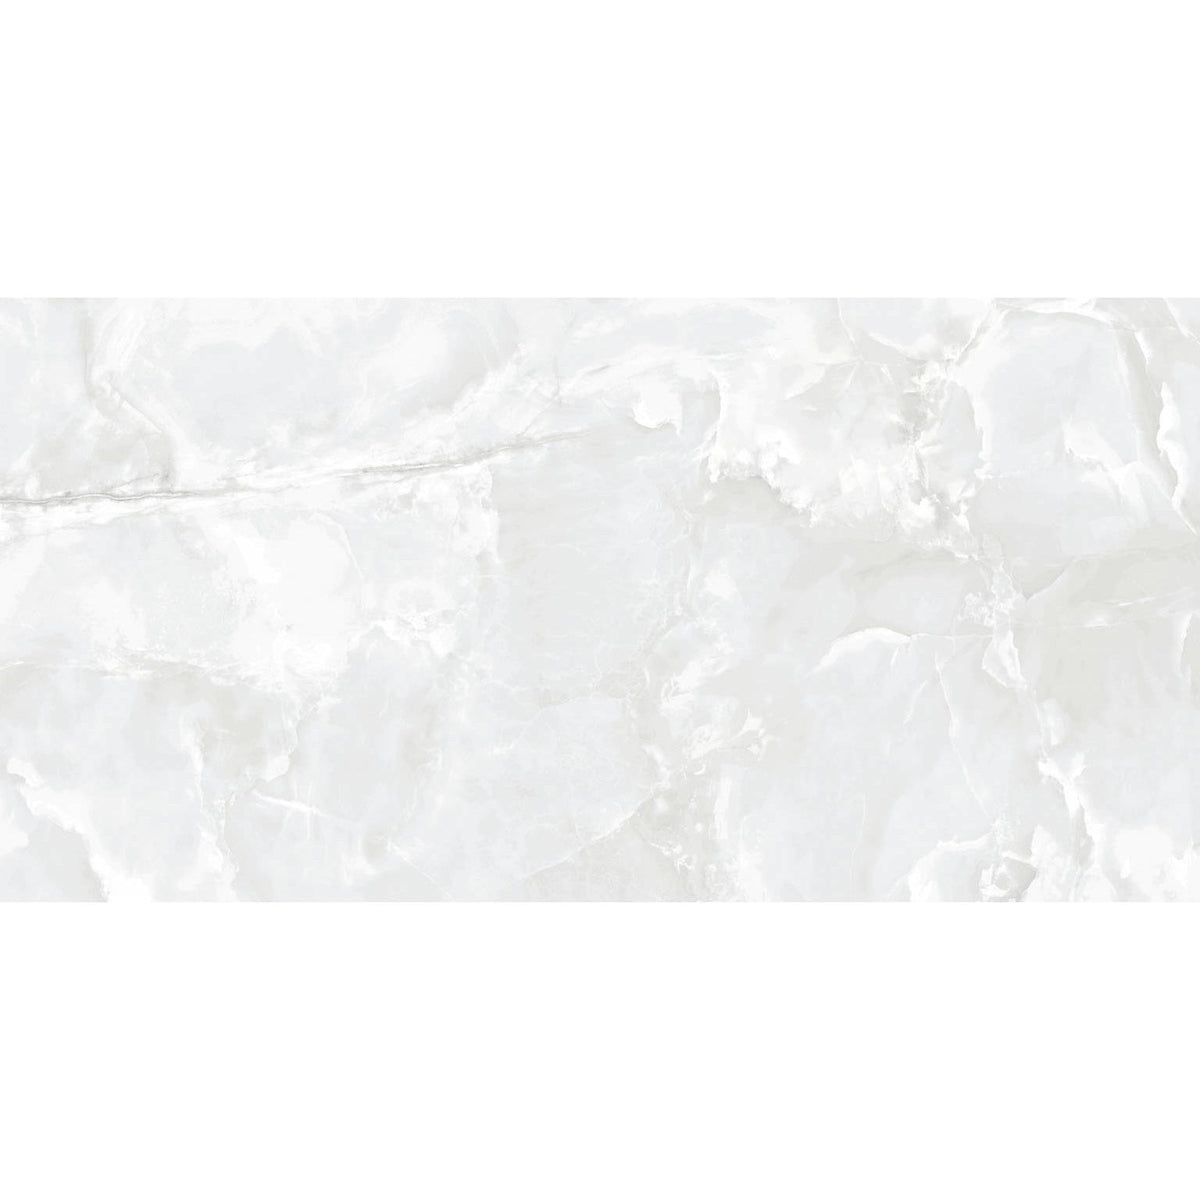 General Ceramic - Calacatta Eternal Series 12 in. x 24 in. Polished Rectified Porcelain Tile - White